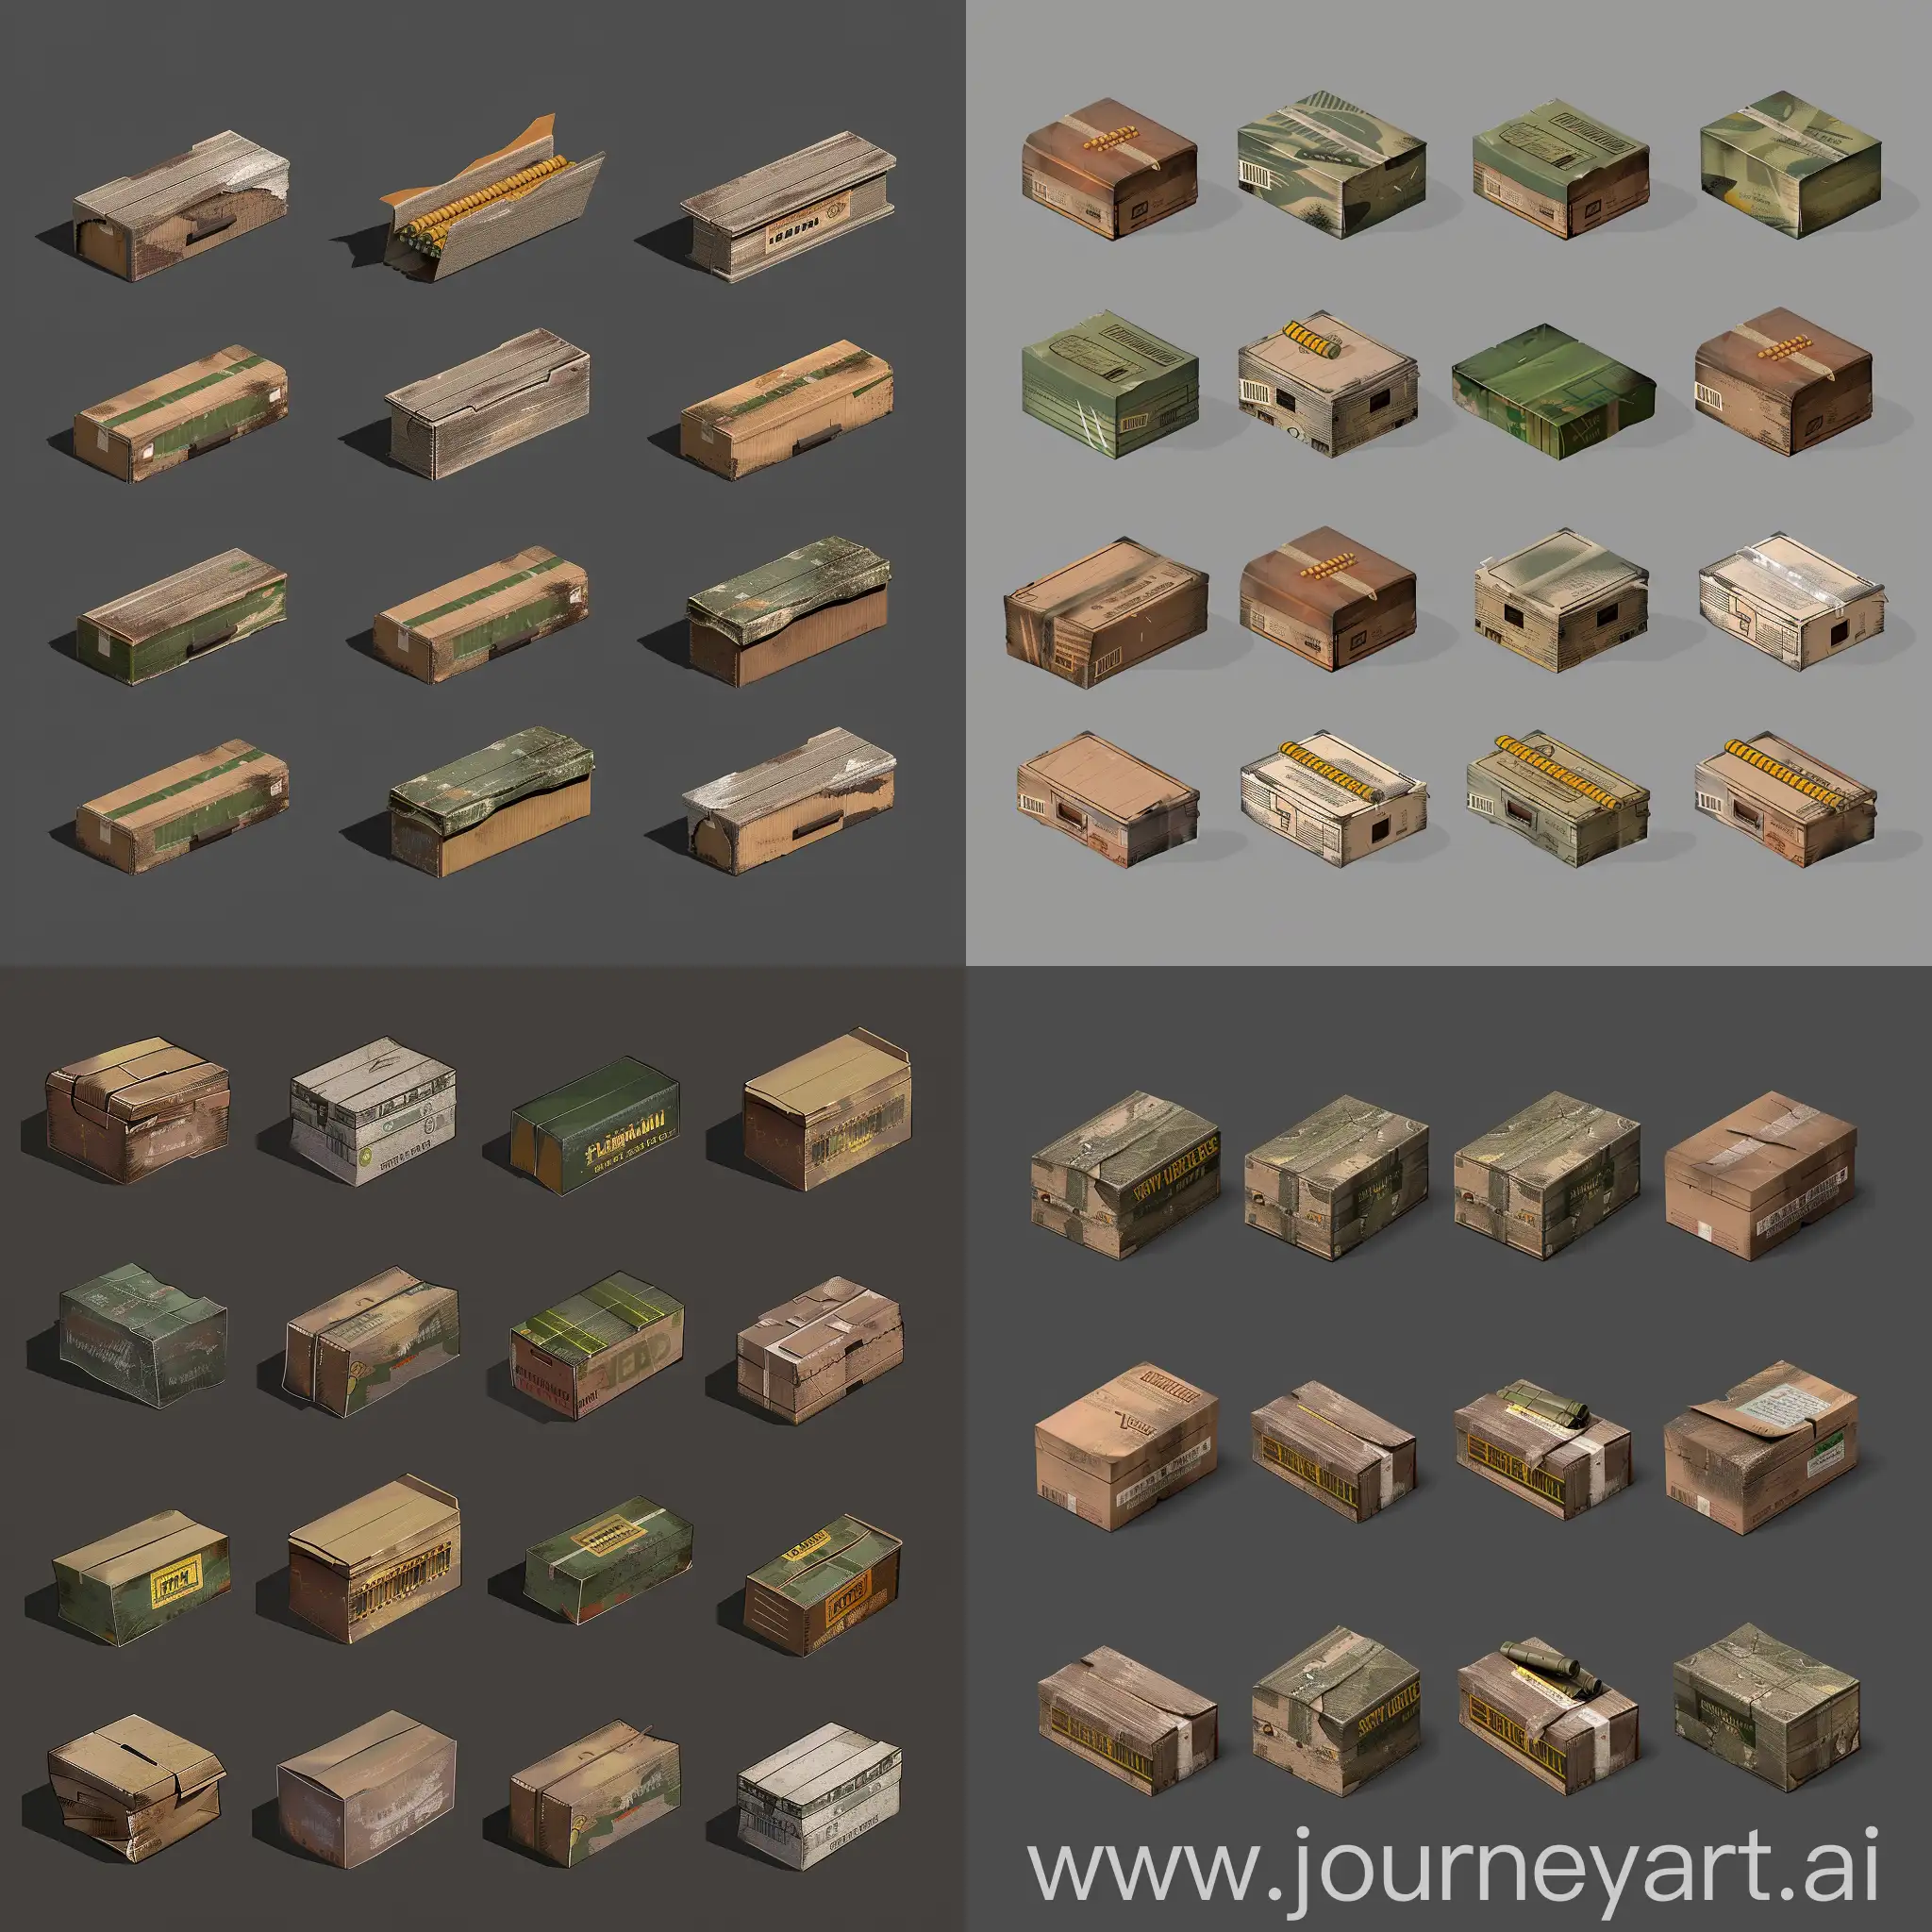 Isometric-Set-of-Worn-Ammo-Cardboard-Boxes-in-Blender-3D-Style